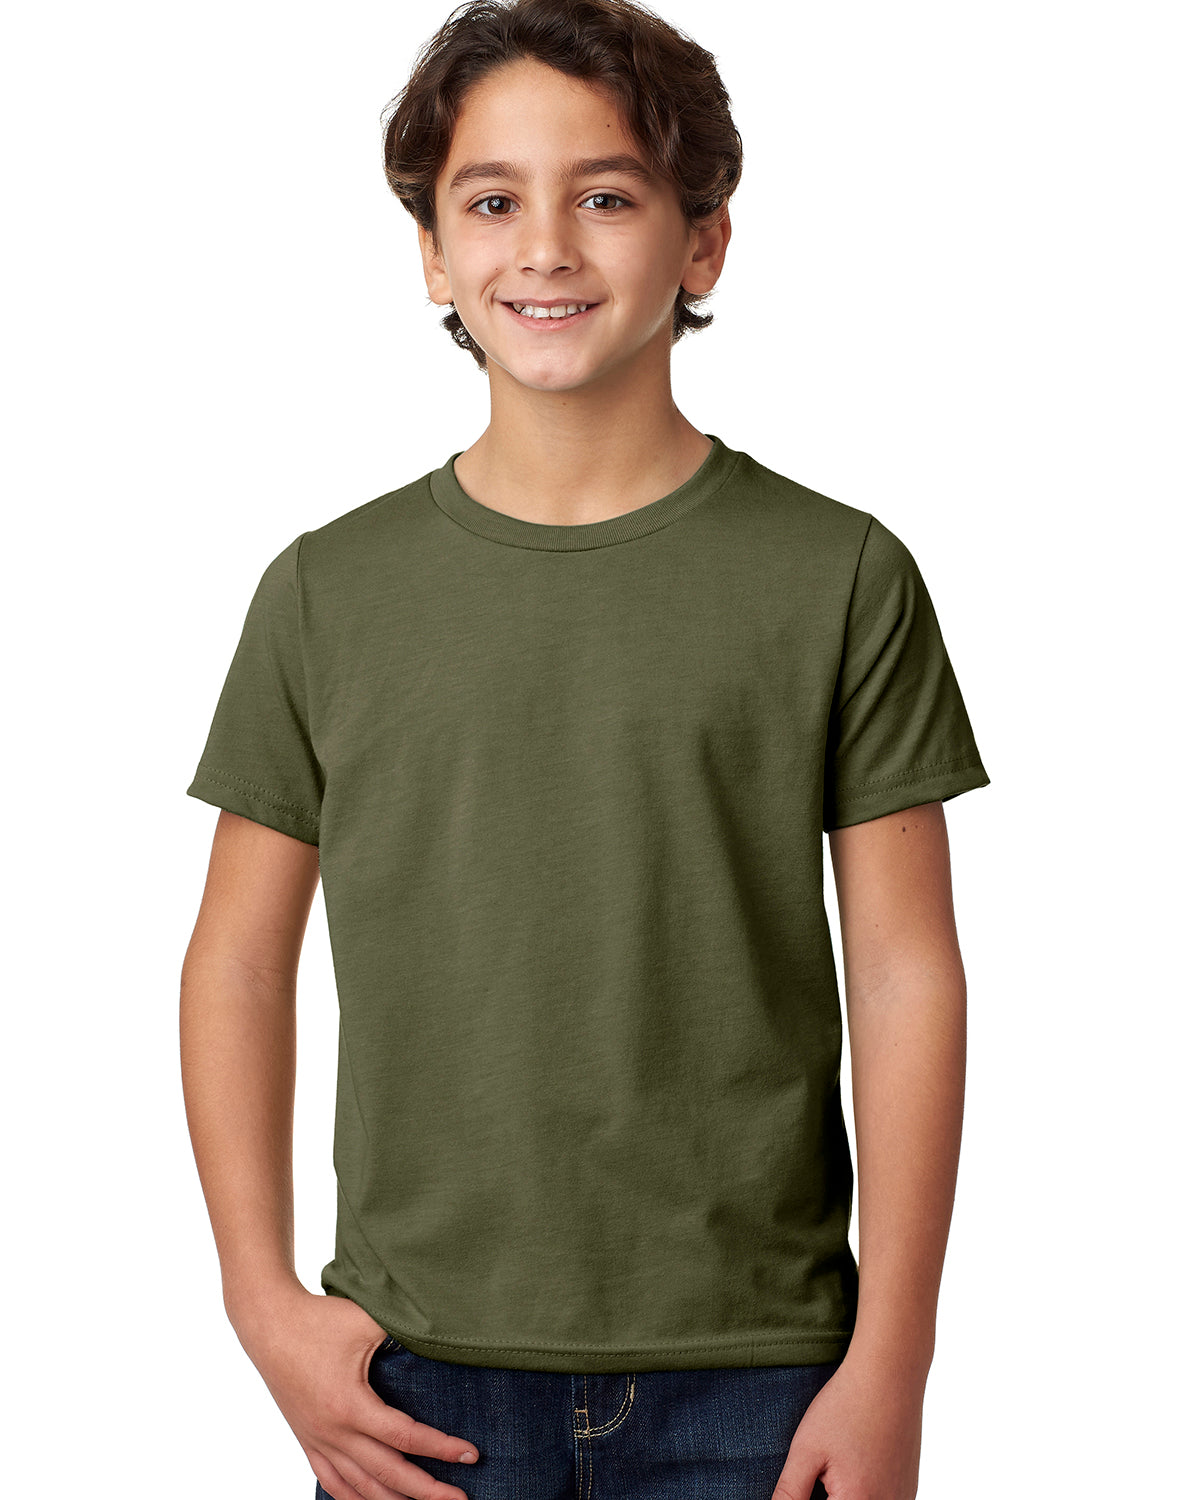 child model wearing next level youth CVC tee in military green